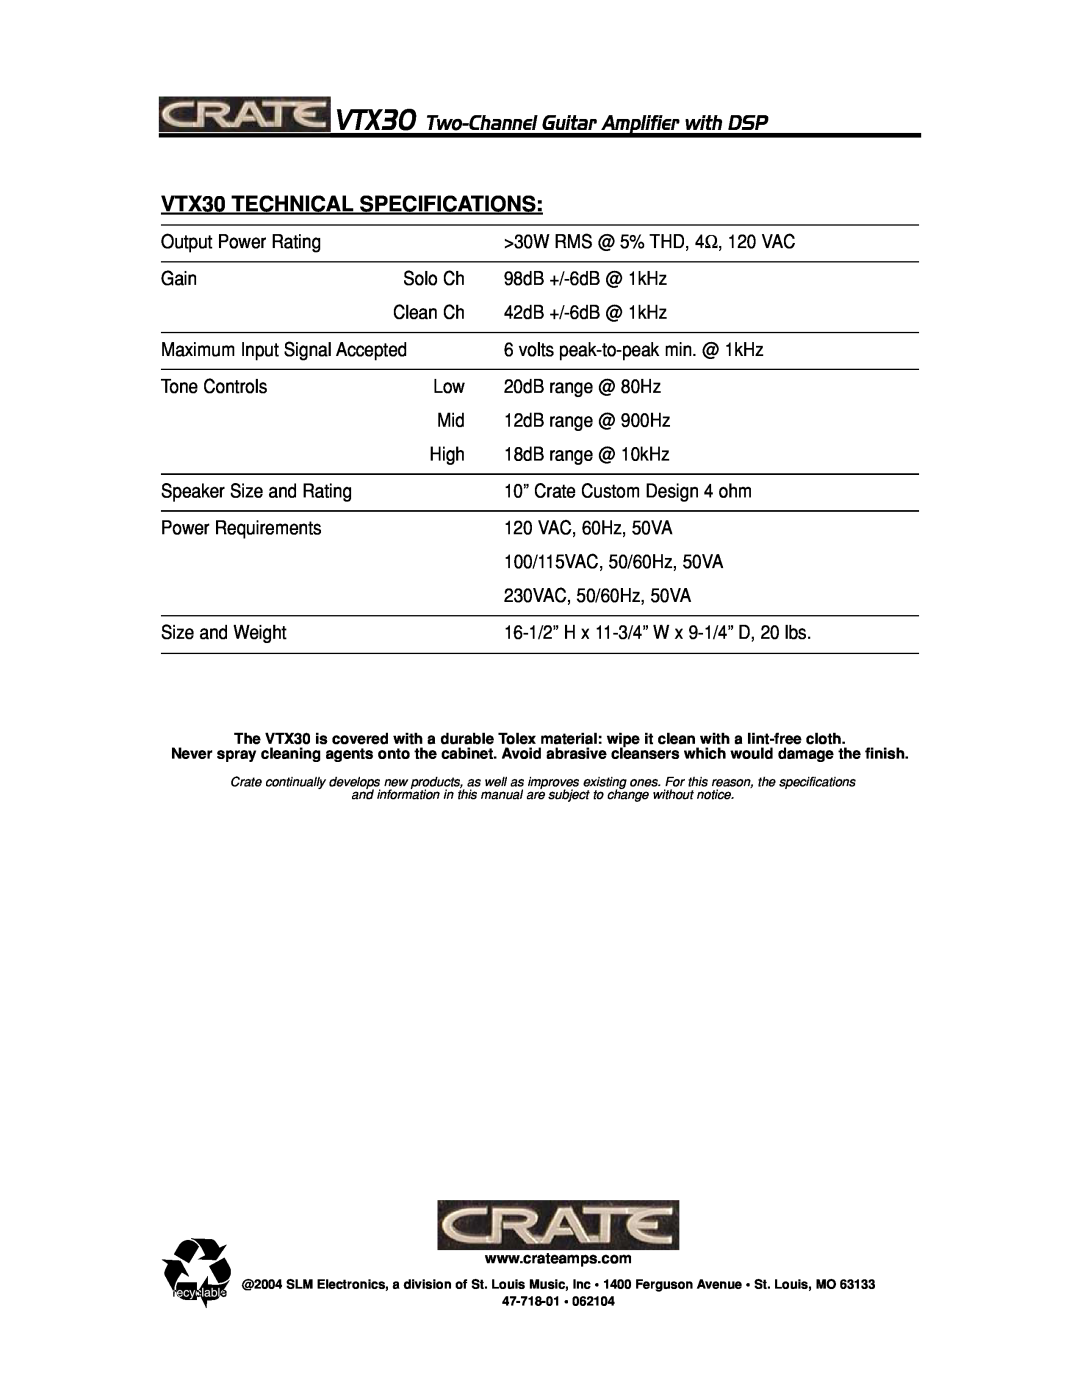 Crate Amplifiers manual VTX30 TECHNICAL SPECIFICATIONS, VTX30 Two-ChannelGuitar Amplifier with DSP 